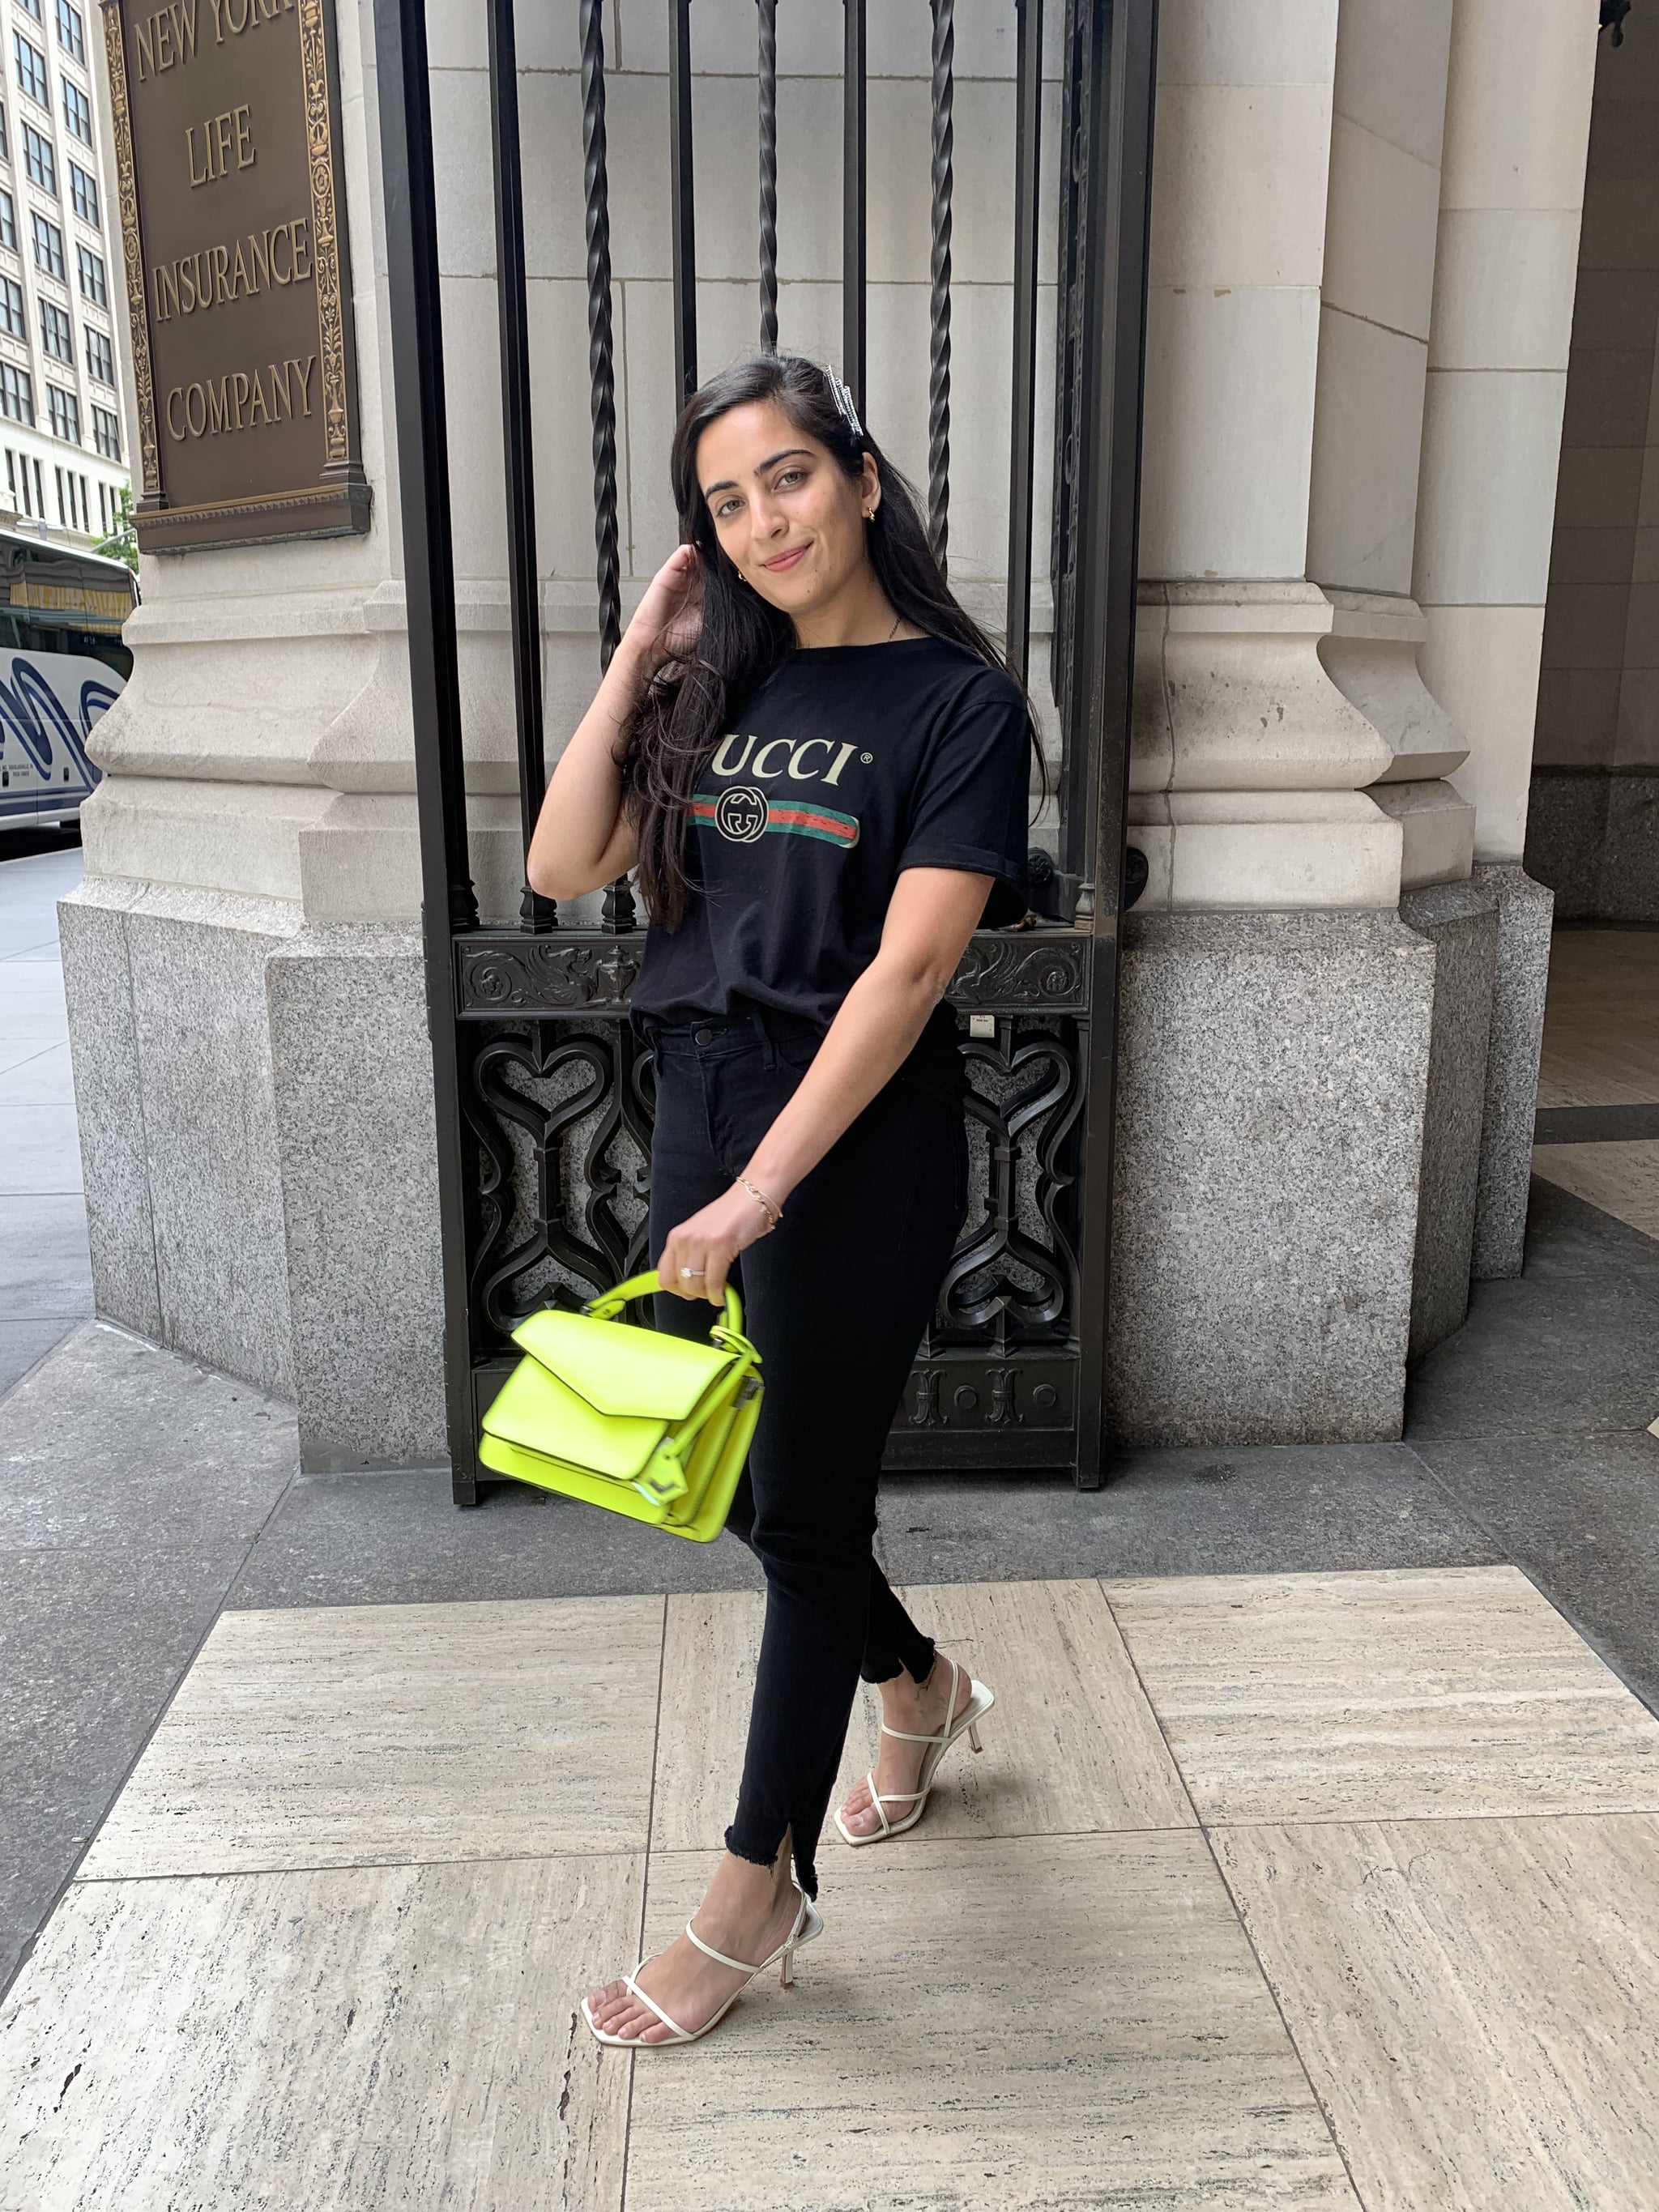 gucci t shirt outfit